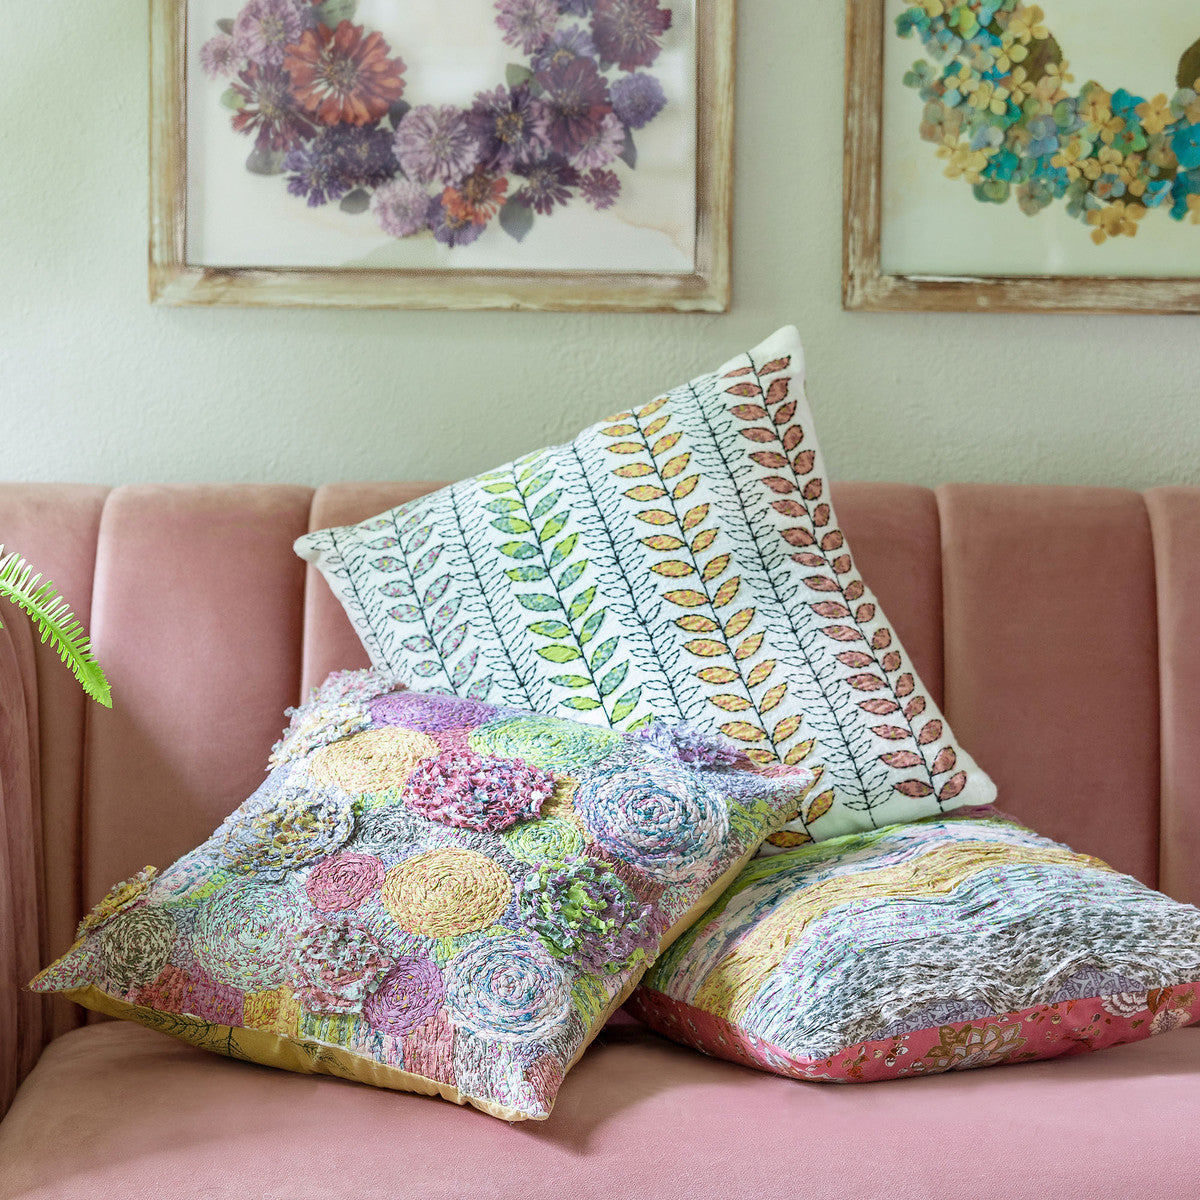 embroidered-vine-pattern-throw-pillows-in-living-room